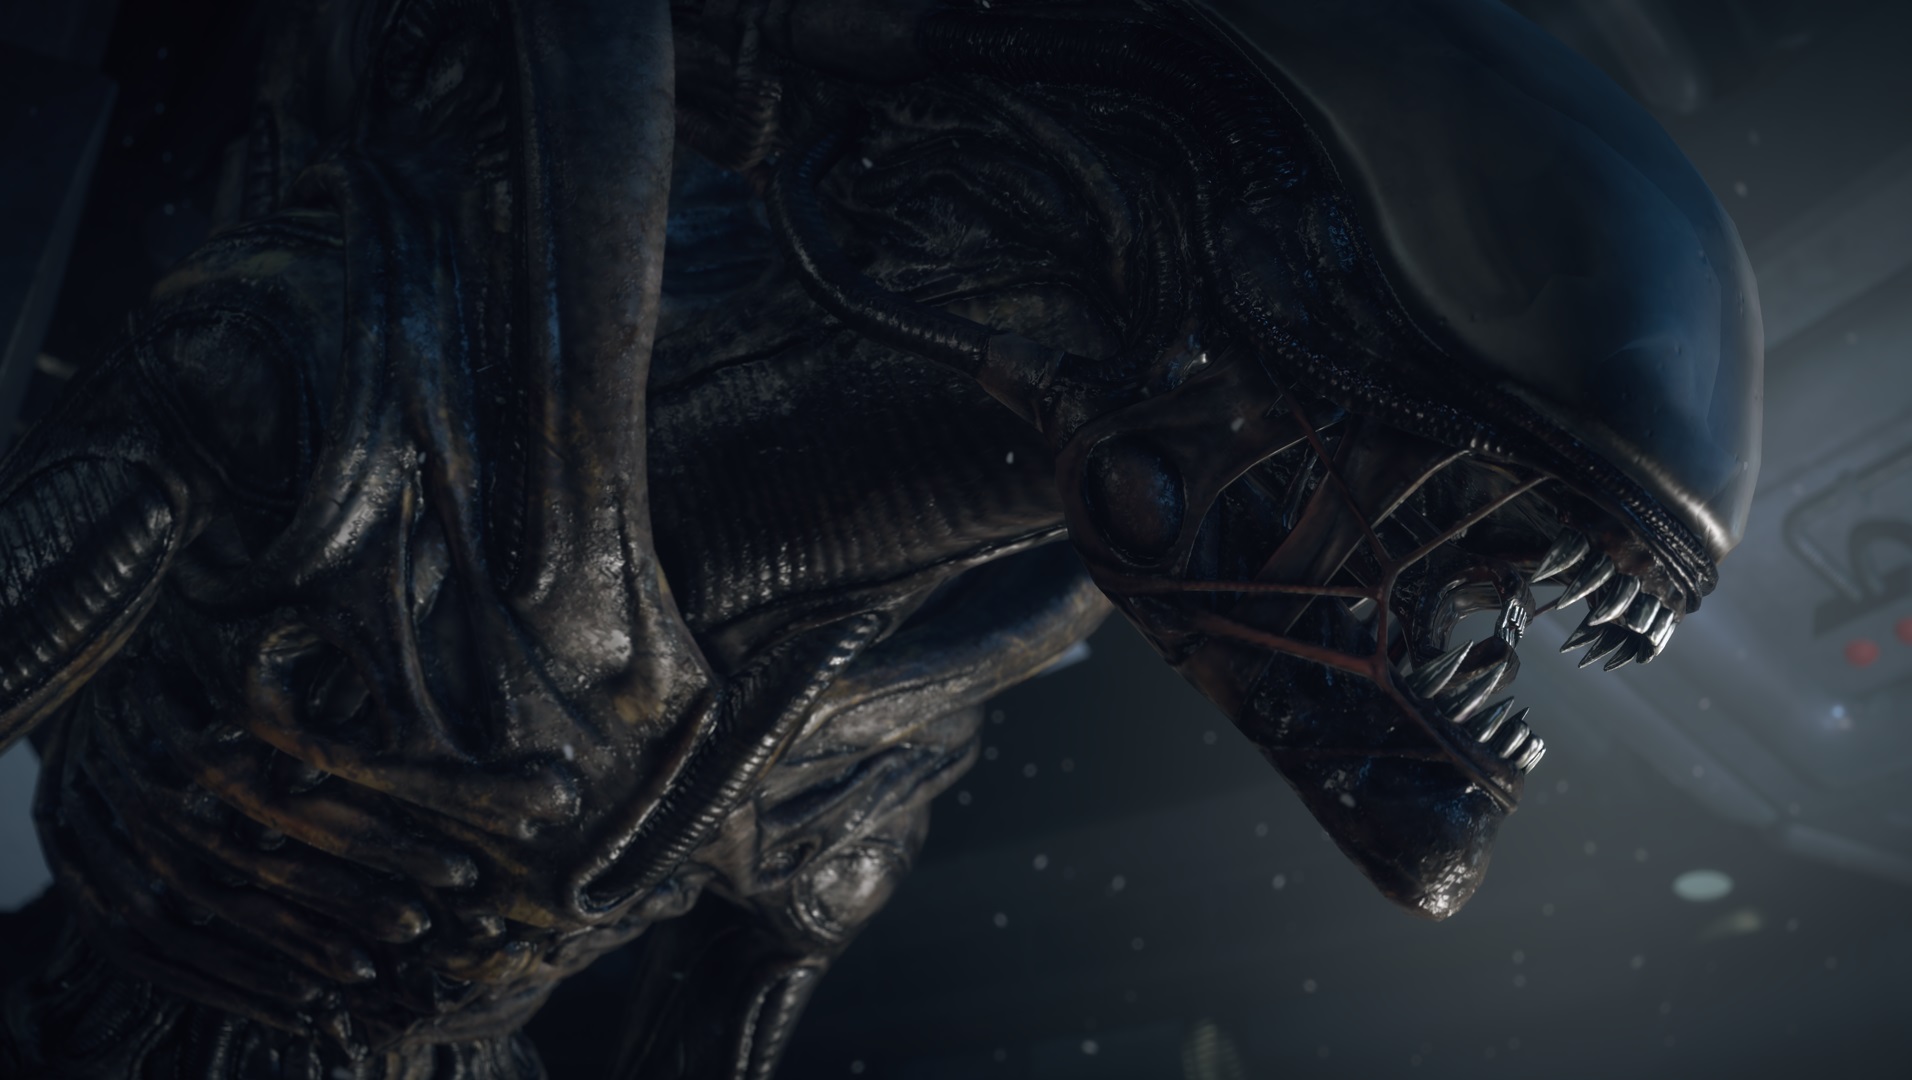 It Turns Out That Not One, But Two Alien Games Were Scrapped When Disney Bought 20th Century Fox